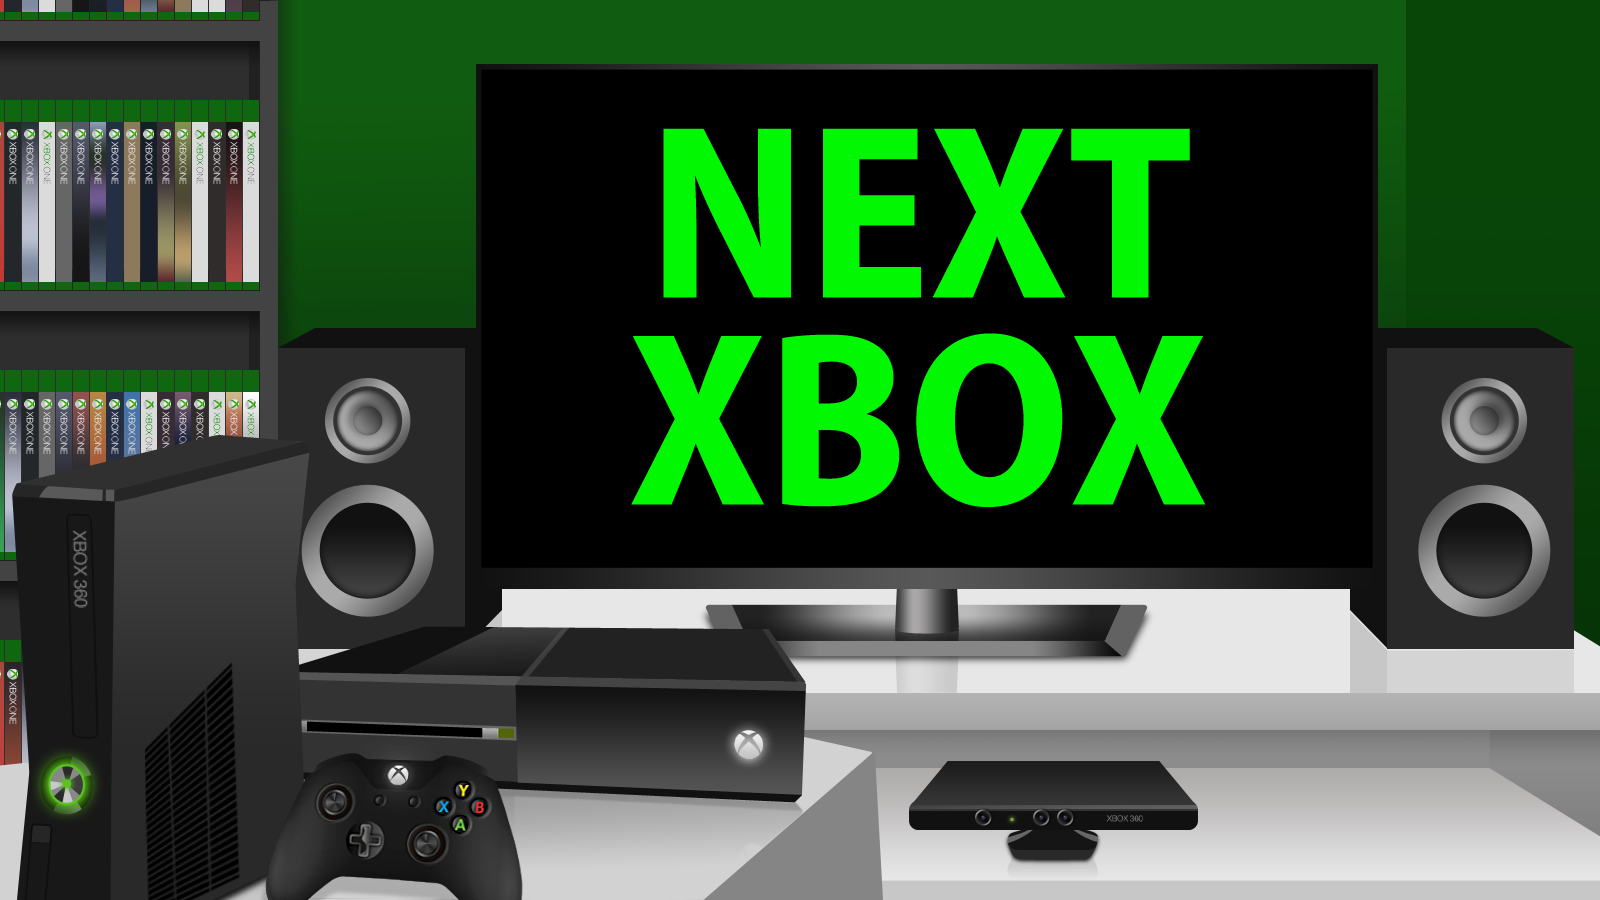 what's the name of the new xbox